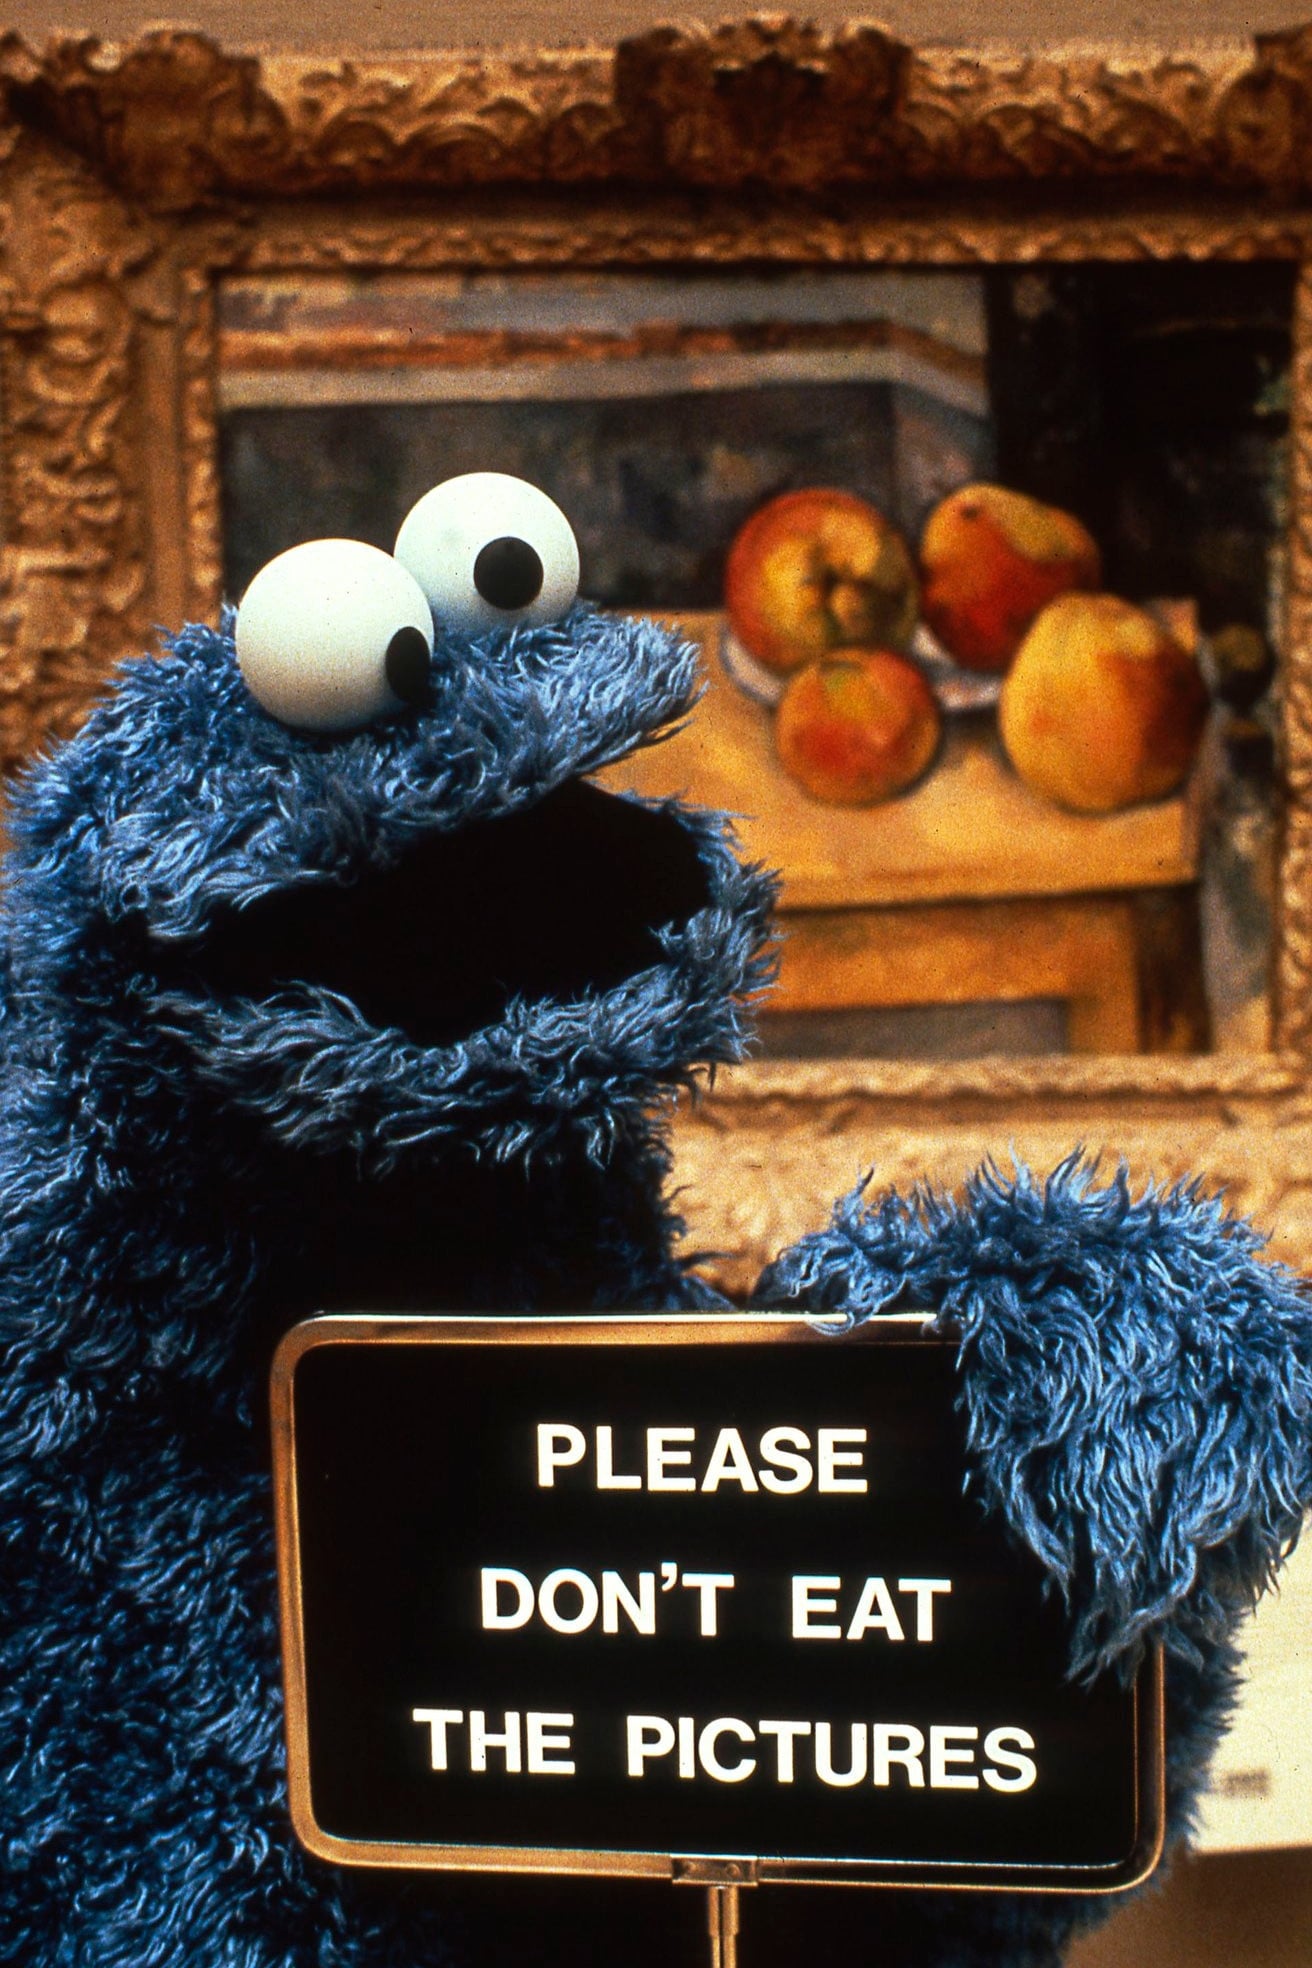 Don't Eat the Pictures: Sesame Street at the Metropolitan Museum of Art (1983)